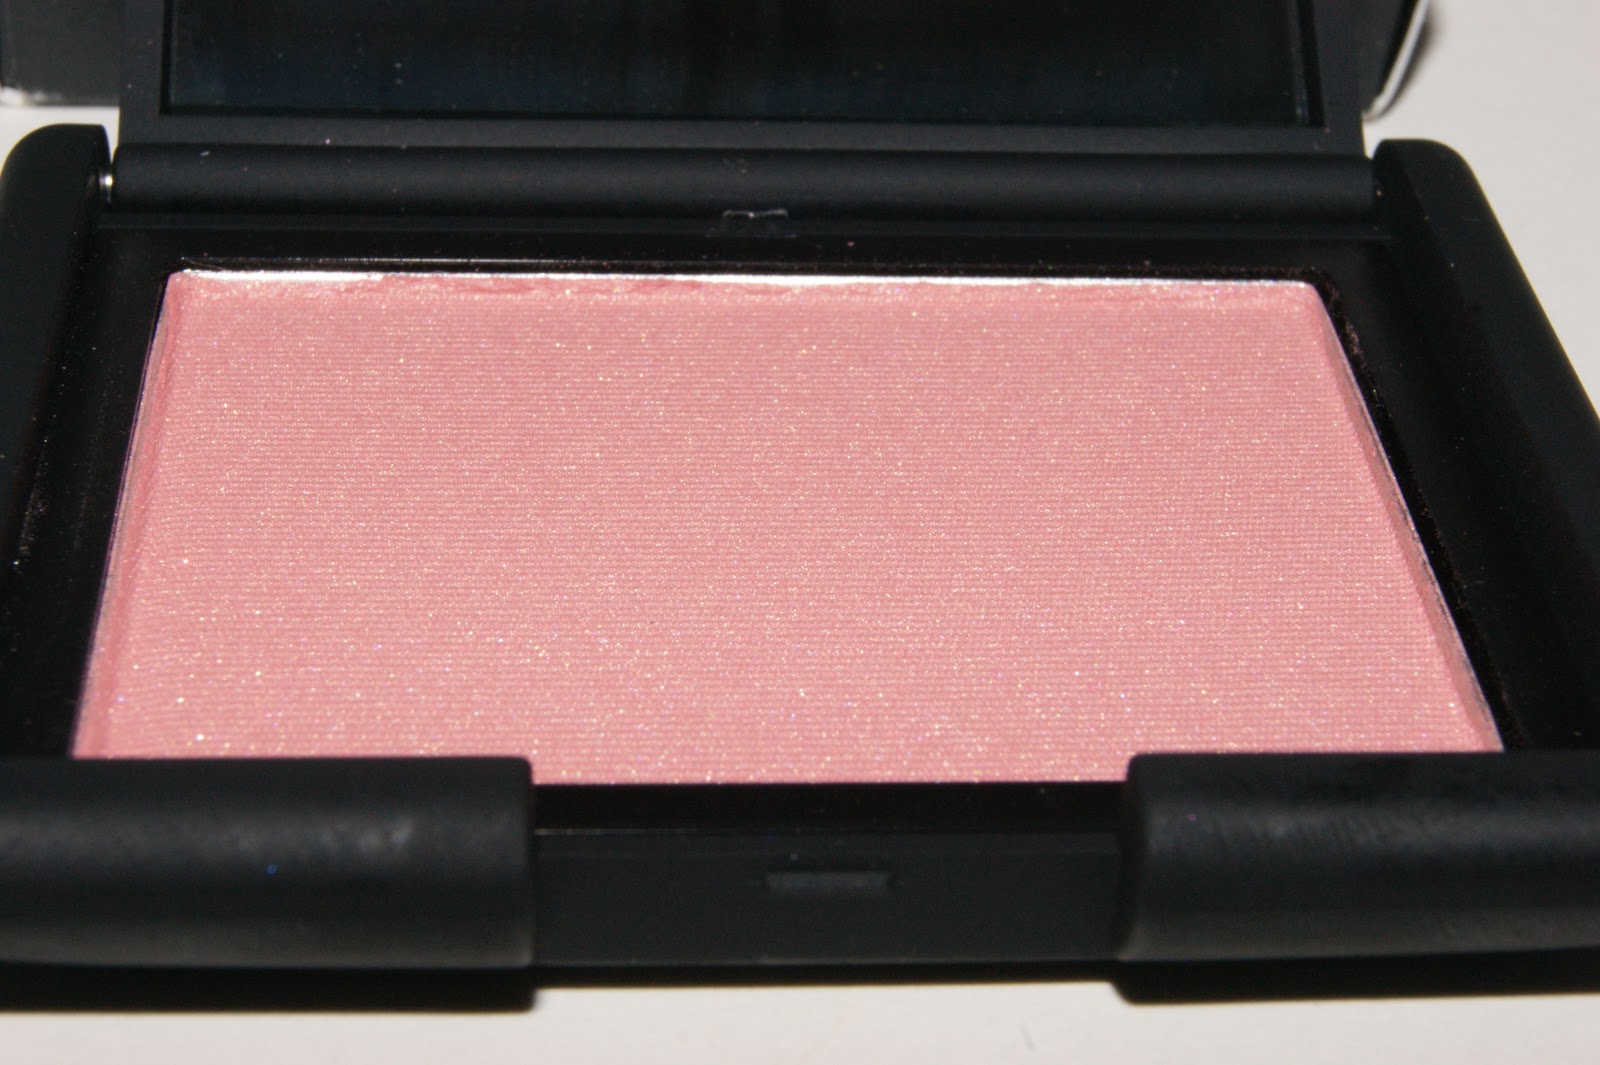 Cute and Mundane: NARS Deep Throat blush review + swatches